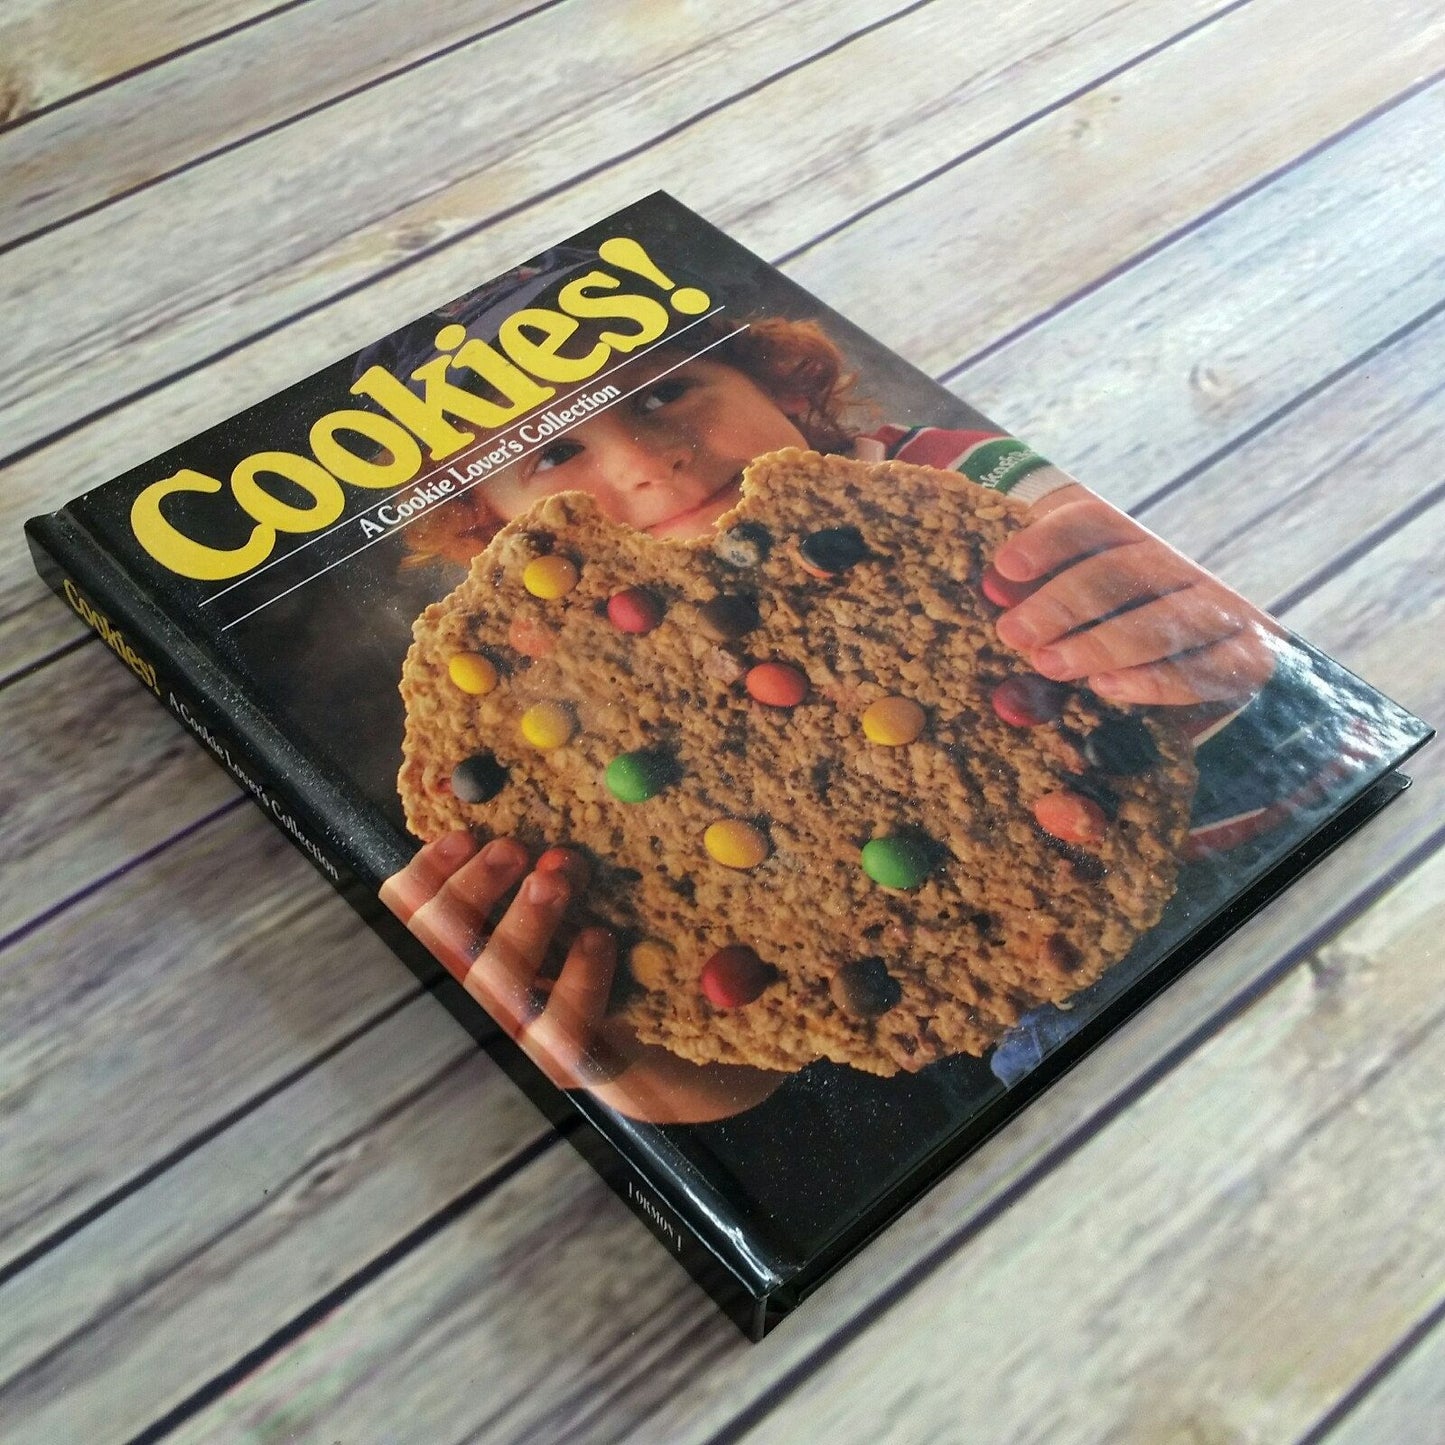 Cookies a Cookie Lovers Collection Cookbook Cookie Vintage Cook Book 1995 Recipes Hardcover